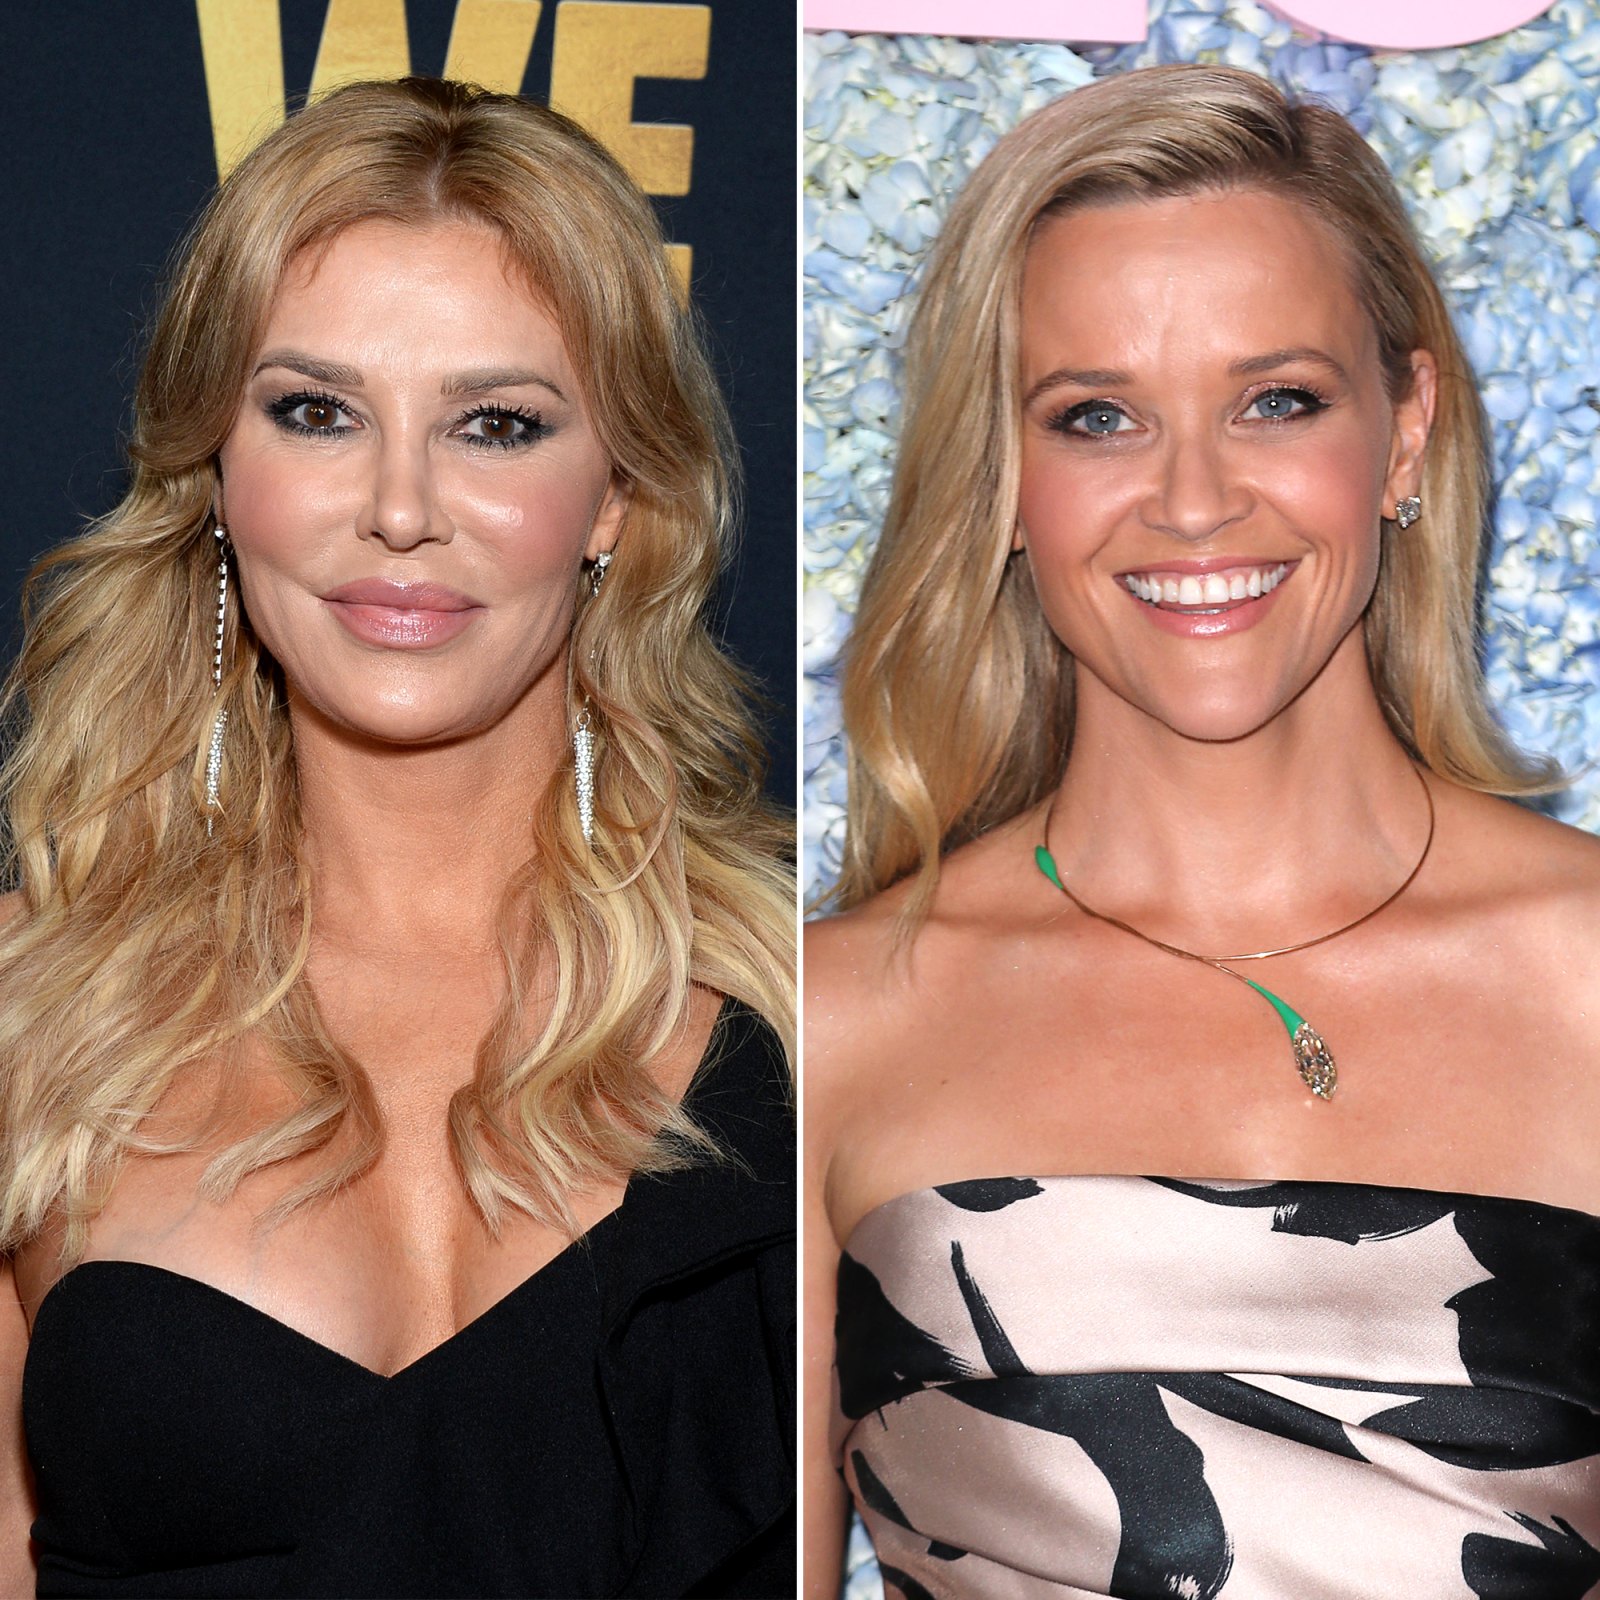 Brandi Glanville, Reese Witherspoon and More Celebs Talk Teaching Kids to Drive